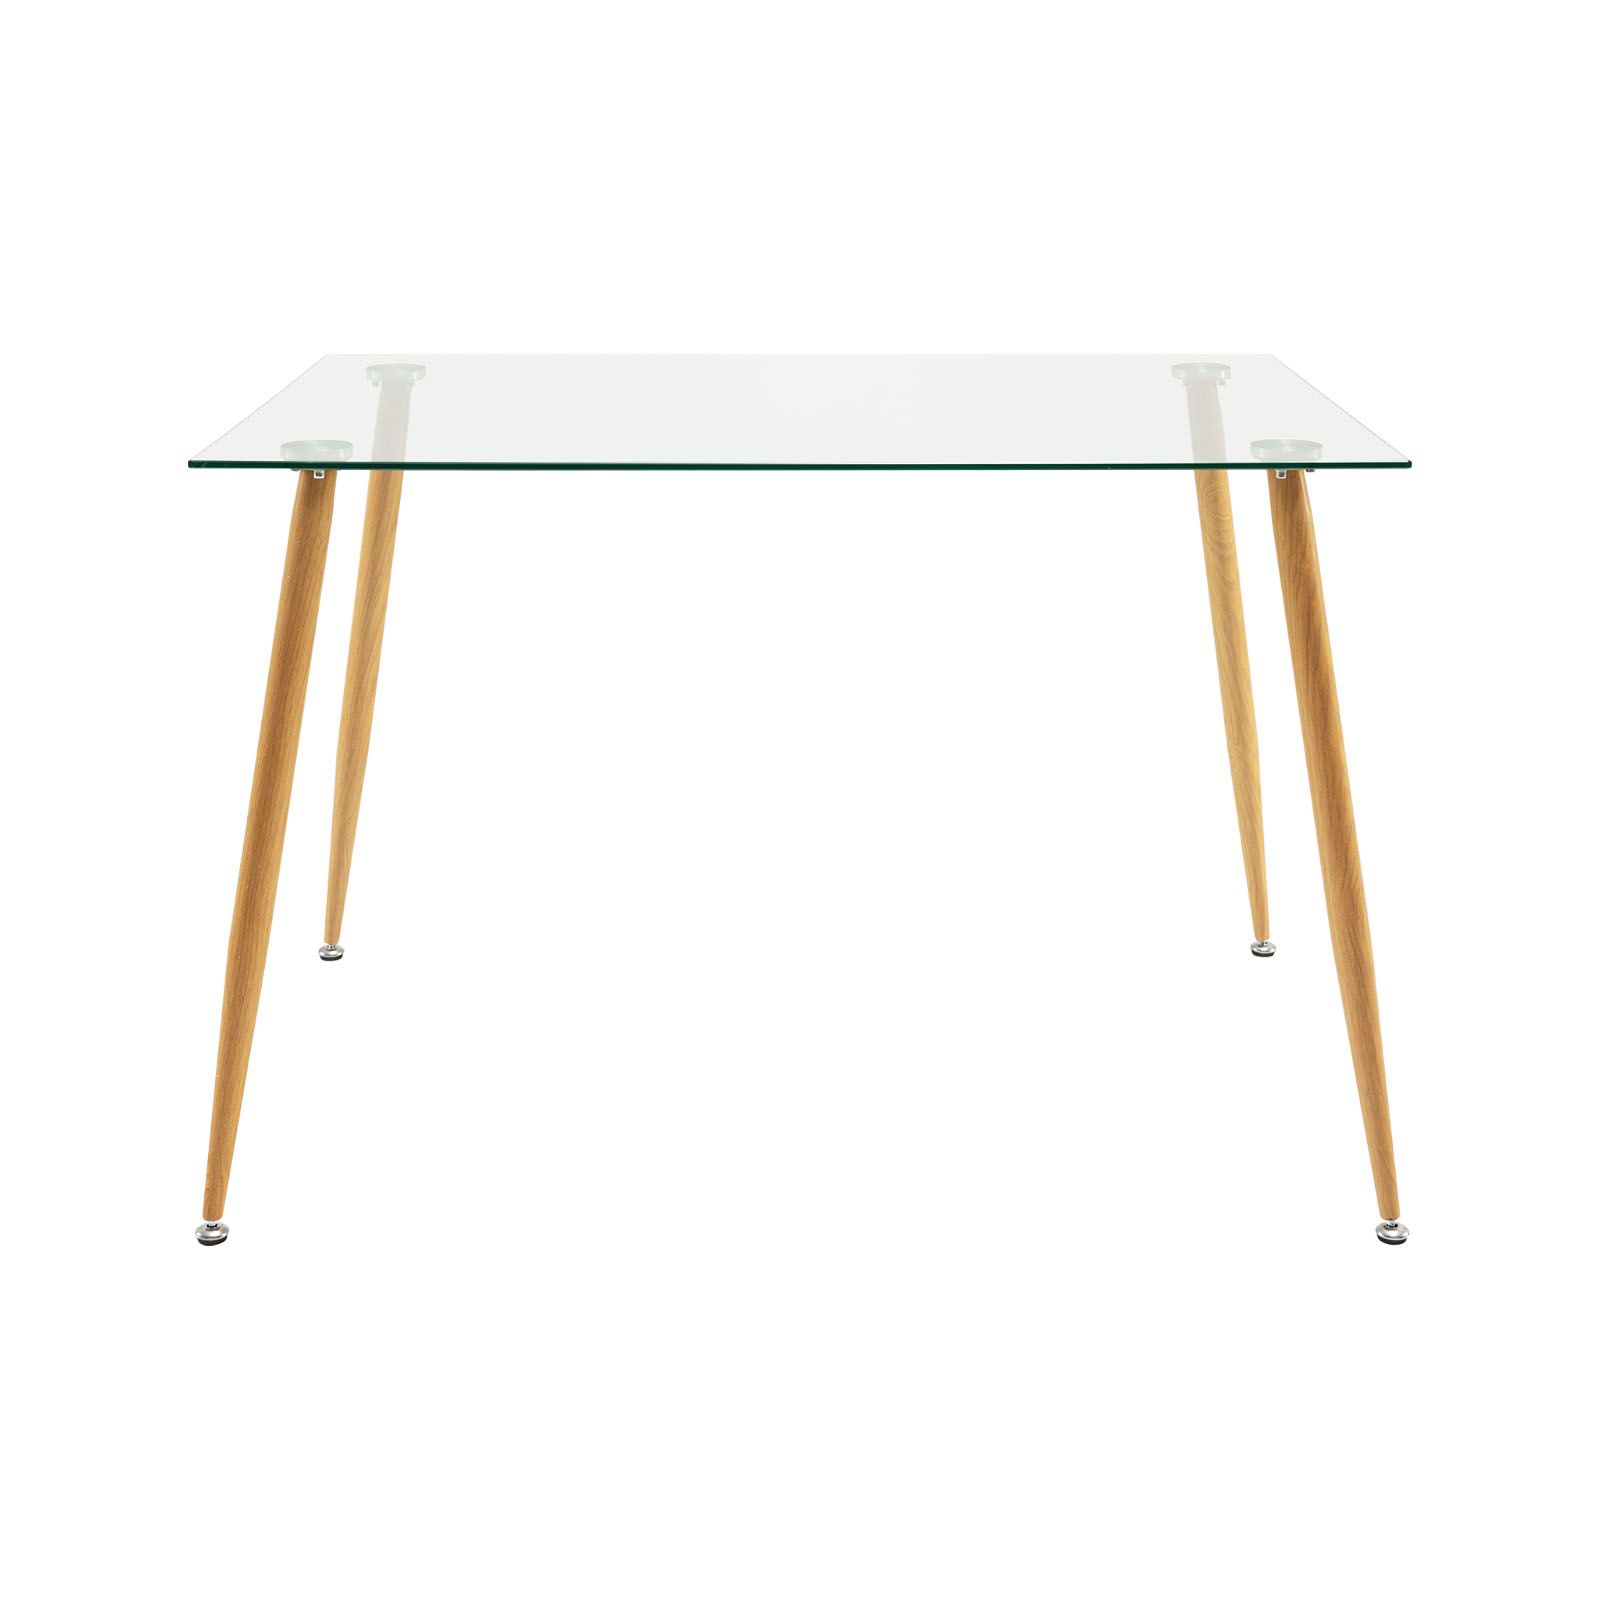 Modern Glass Dining Table with Wood Grain Steel Legs